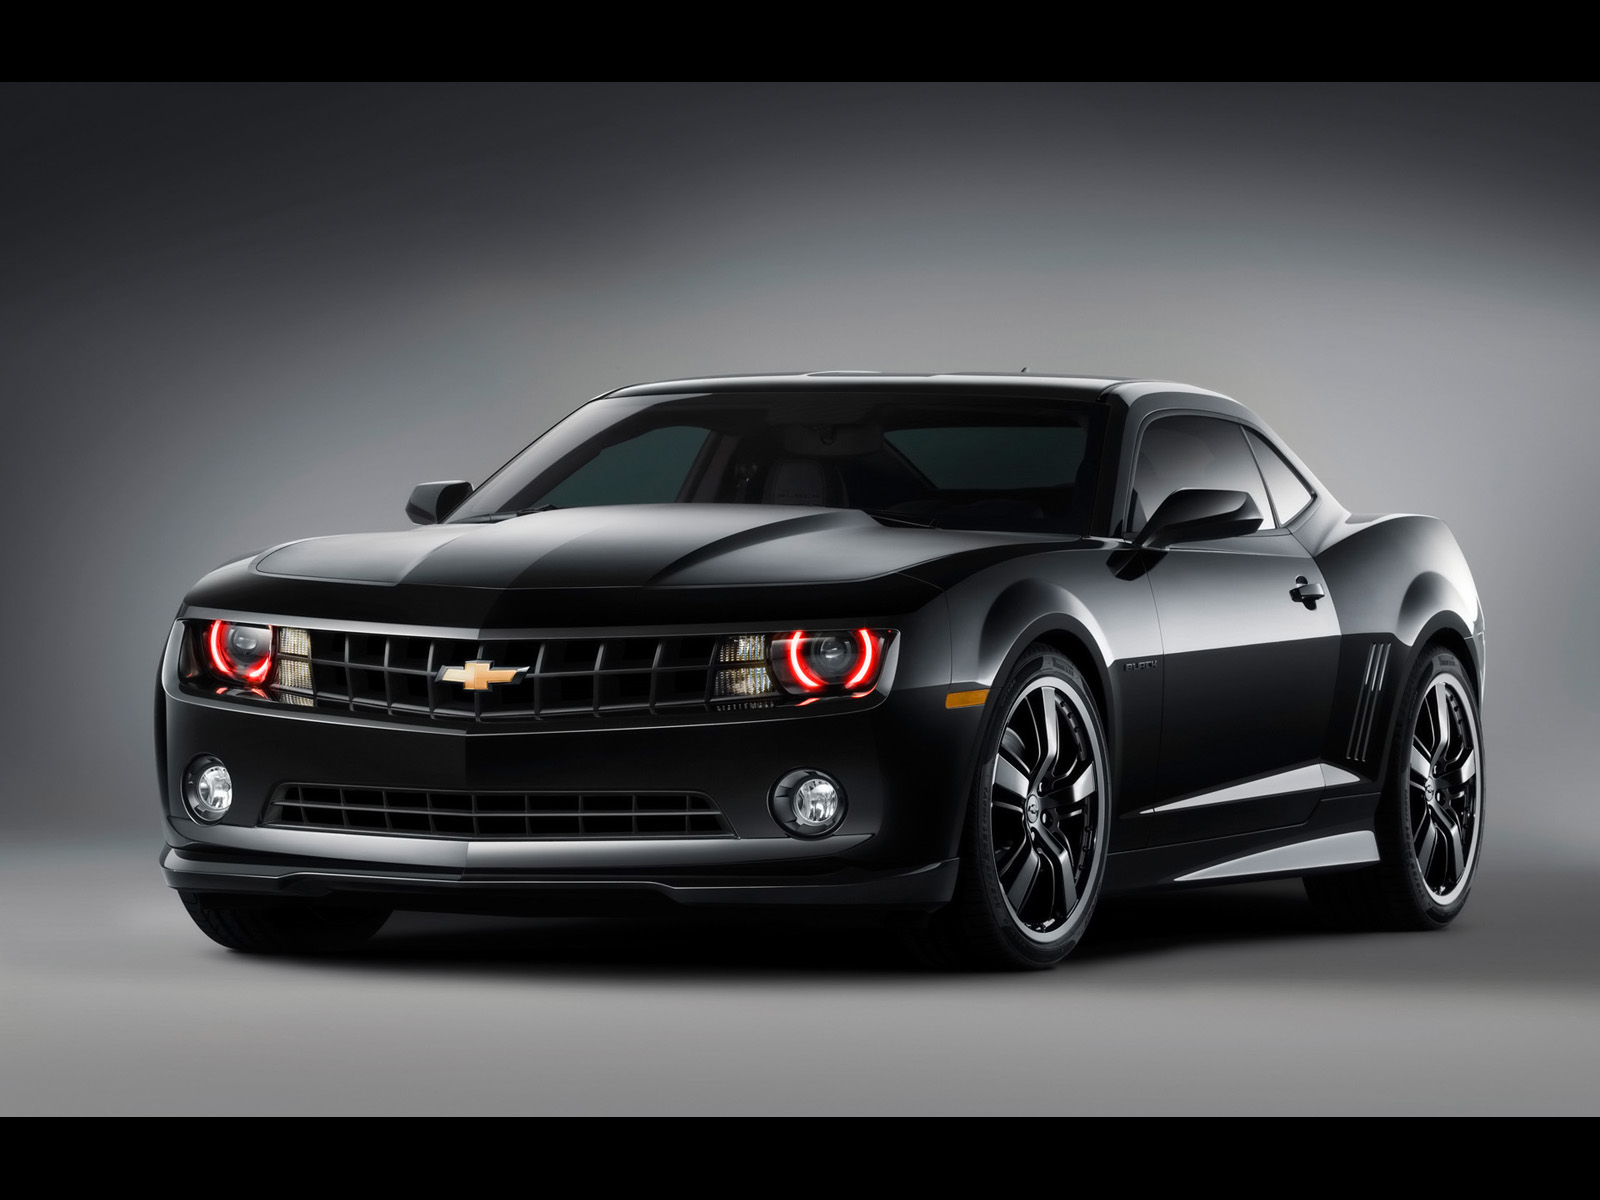 Black Chevy Camaro Wallpaper 5296 Hd Wallpapers in Cars   Imagescicom